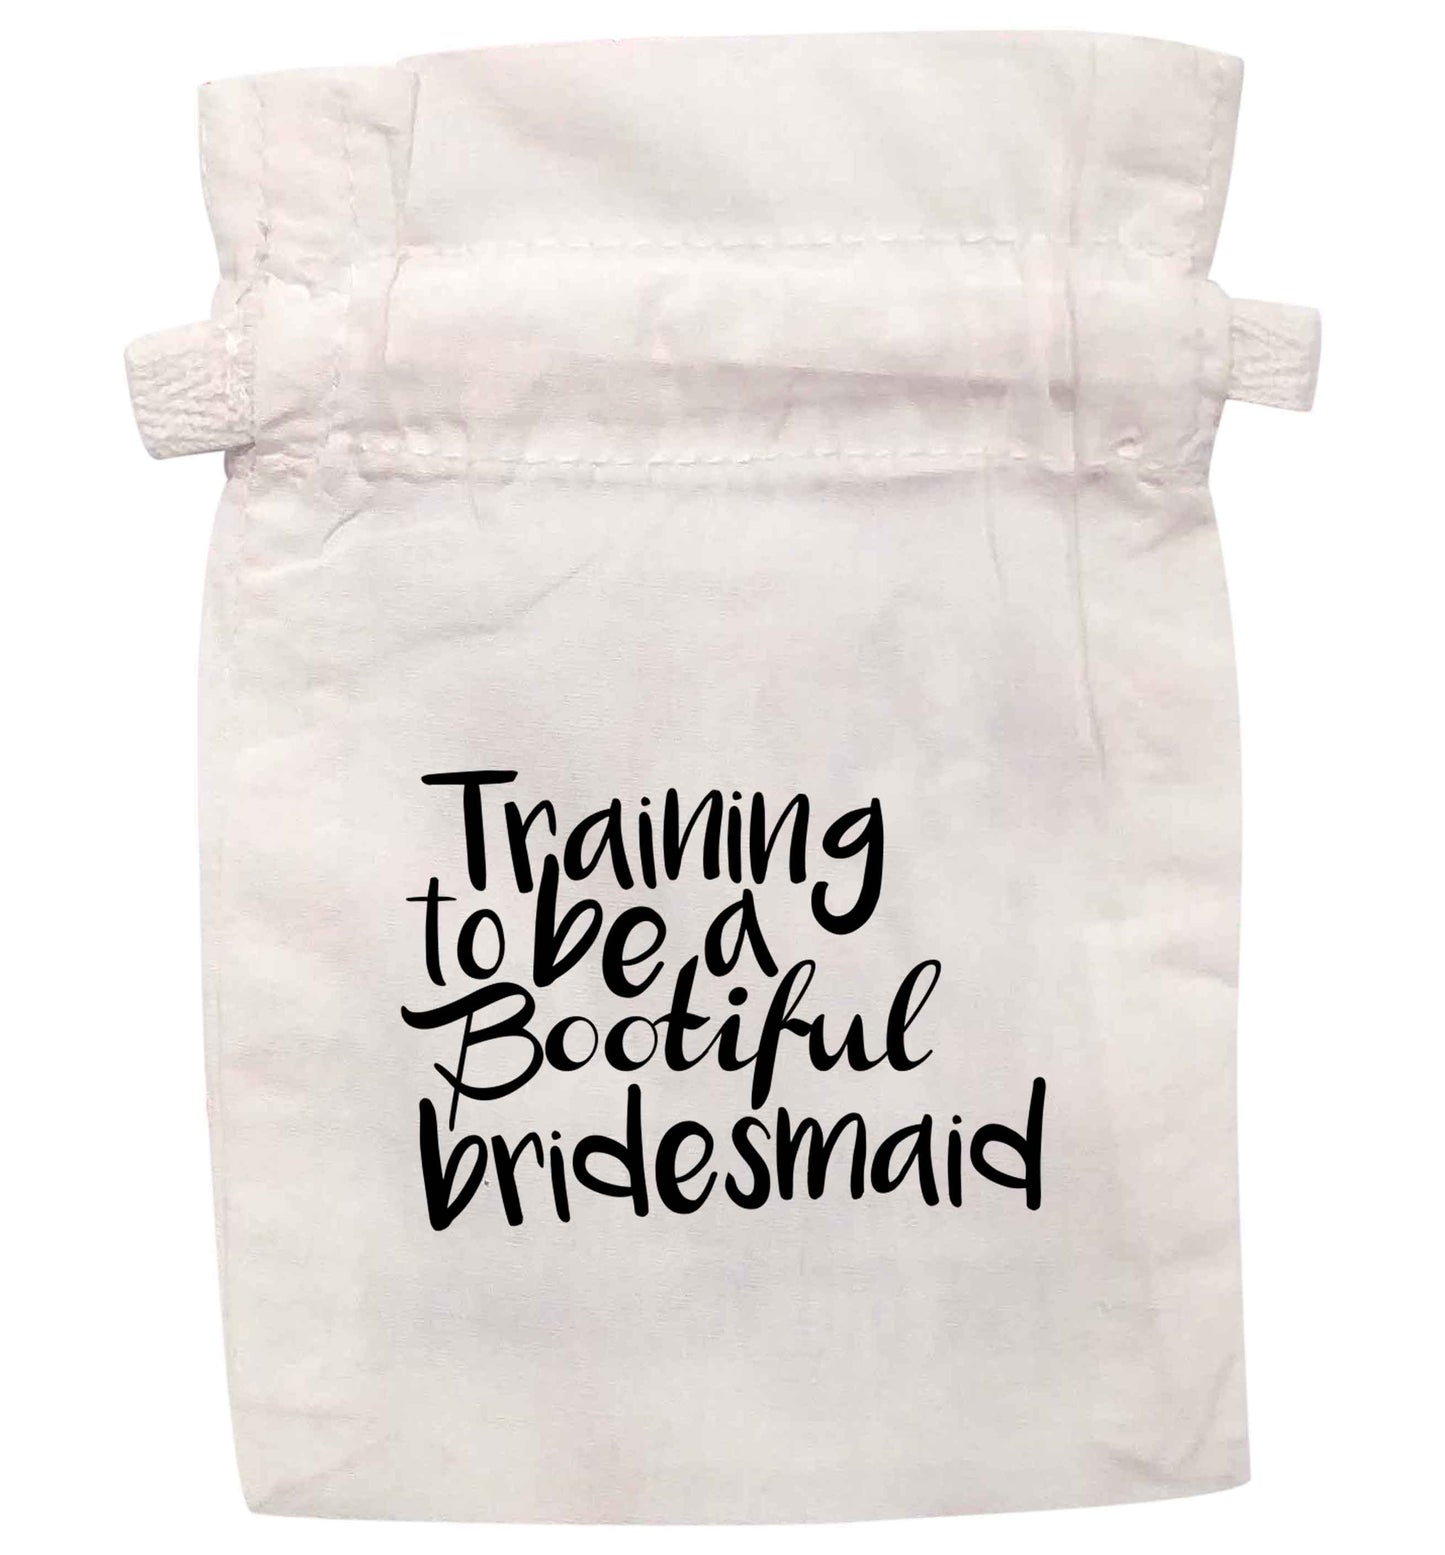 Training to be a bootifull bridesmaid | XS - L | Pouch / Drawstring bag / Sack | Organic Cotton | Bulk discounts available!